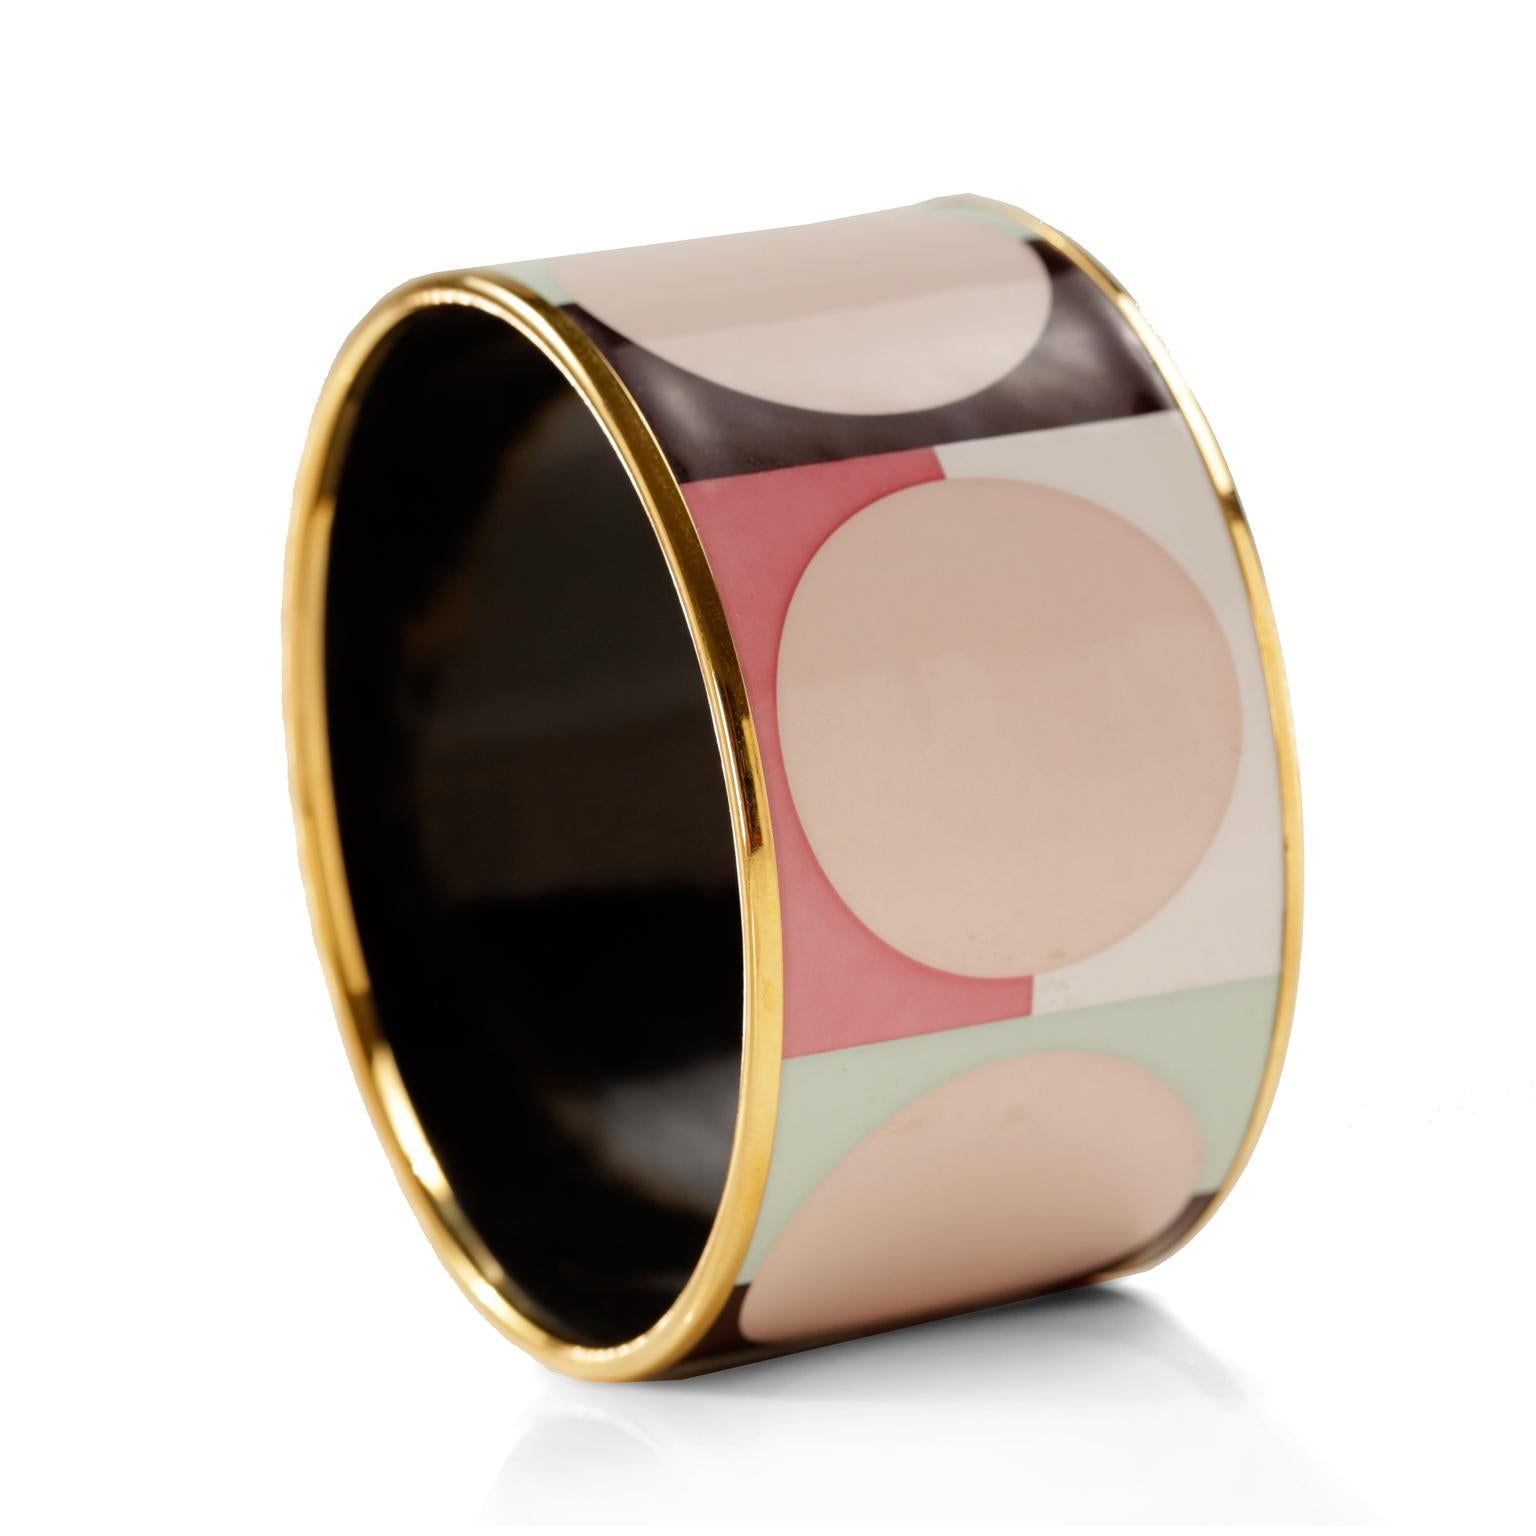 This authentic Hermès Pink Dots Wide Enamel Bracelet is in excellent condition.  Gold tone rim, large pale pink dot design on brown and pastel background. Made in Austria, 2007 production. Approximately 2.75 inch diameter/ 7 cm.

